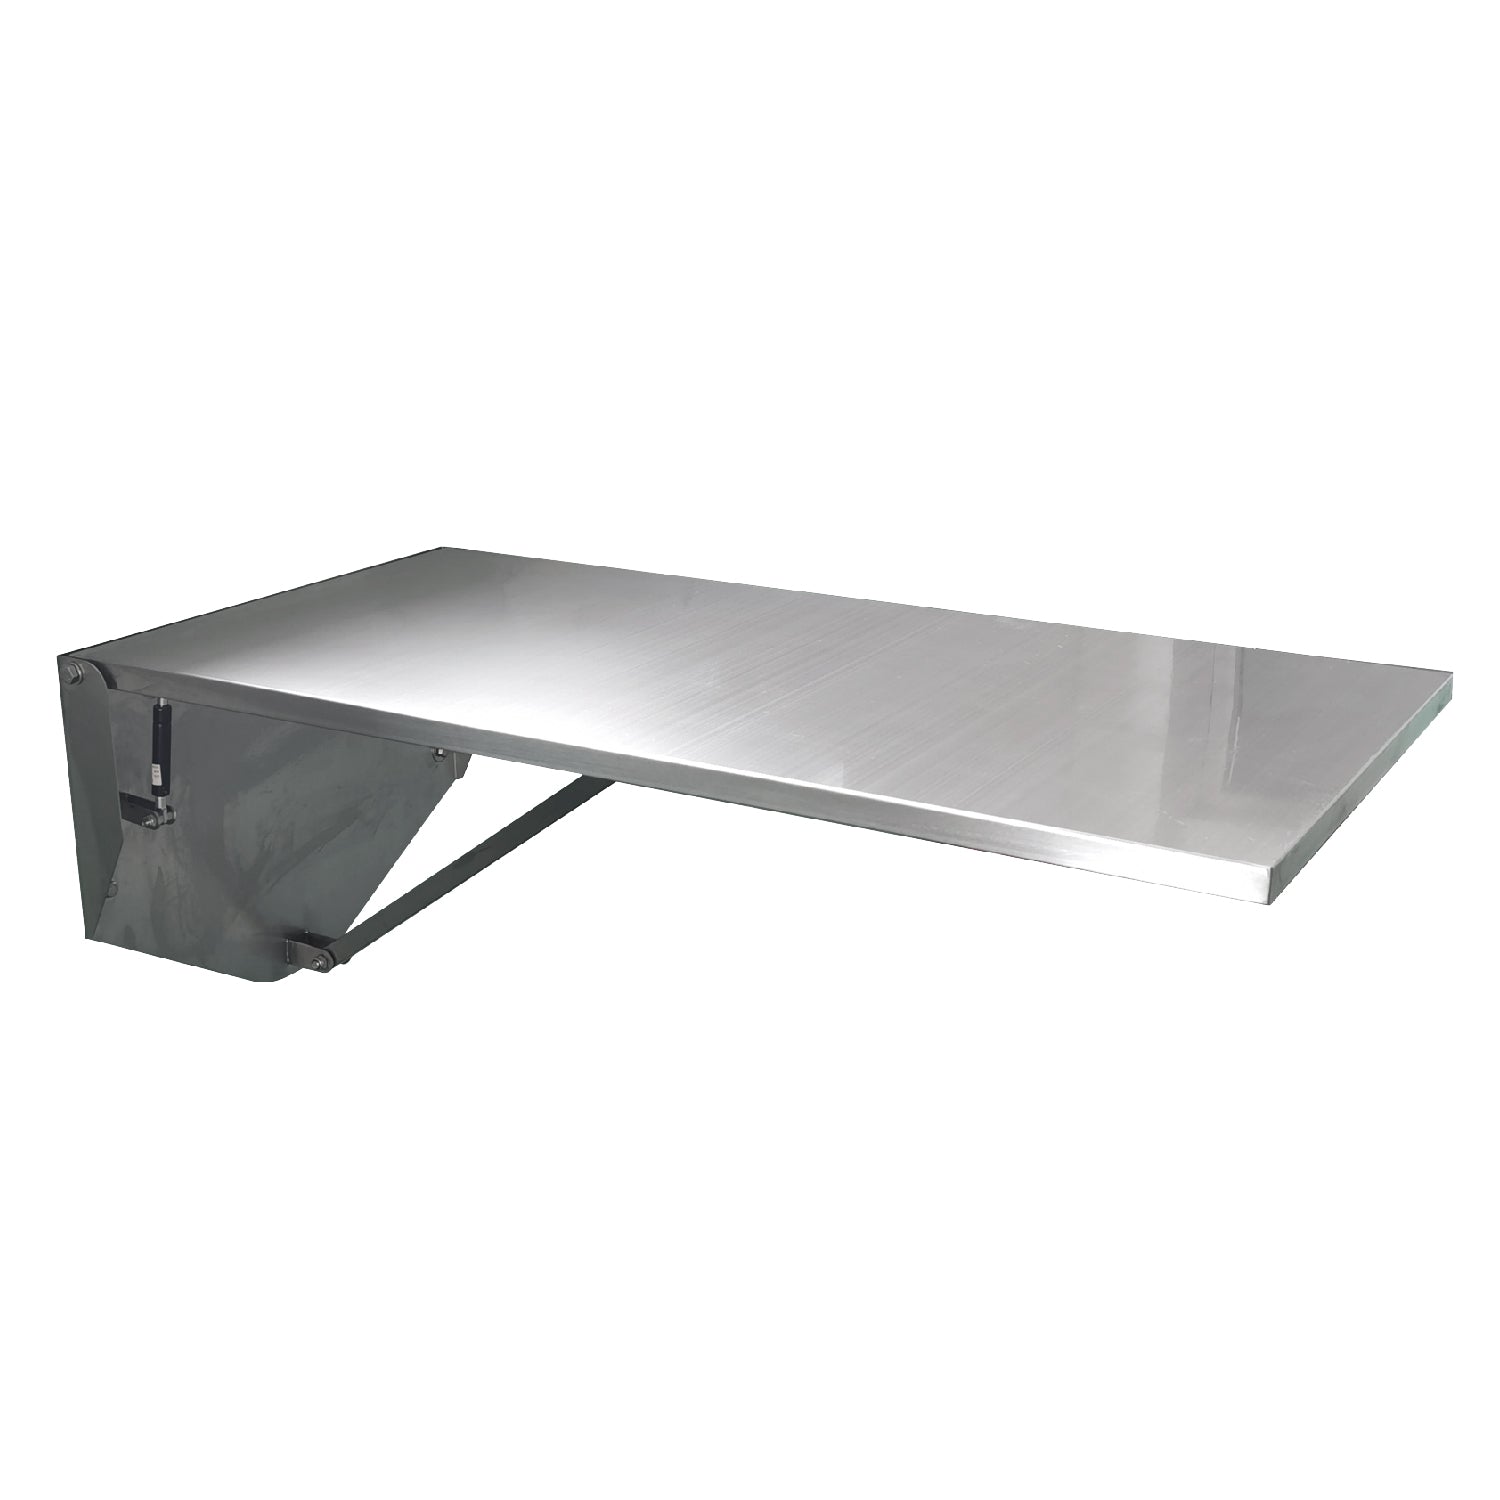 IVT-W843 Wall Mount Table